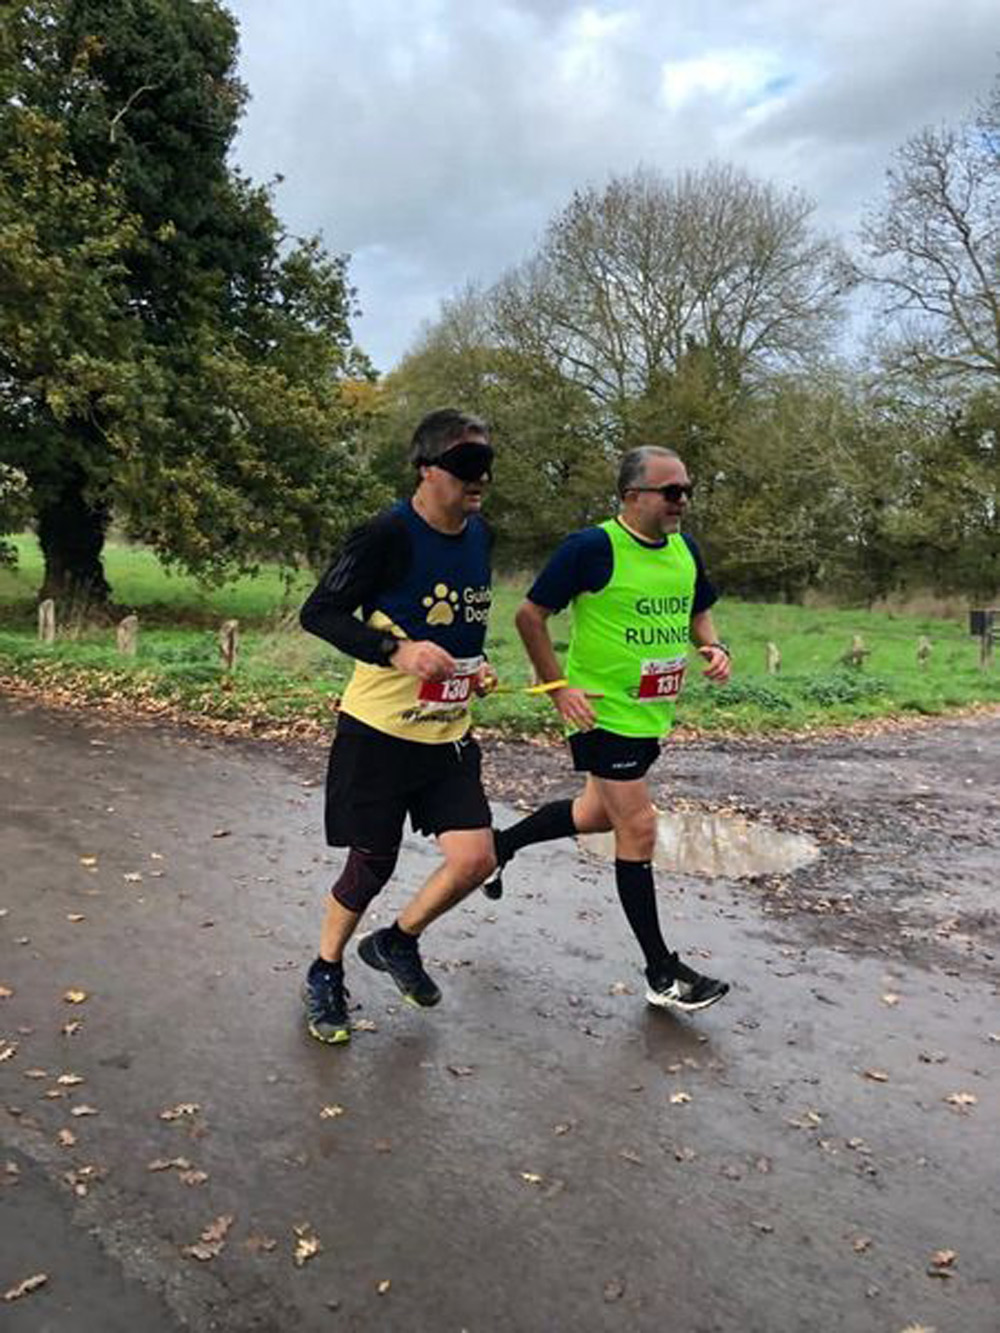 Cliffe Tribe runs with a blindfold guided by John Baker in honour of their friend David Edwards